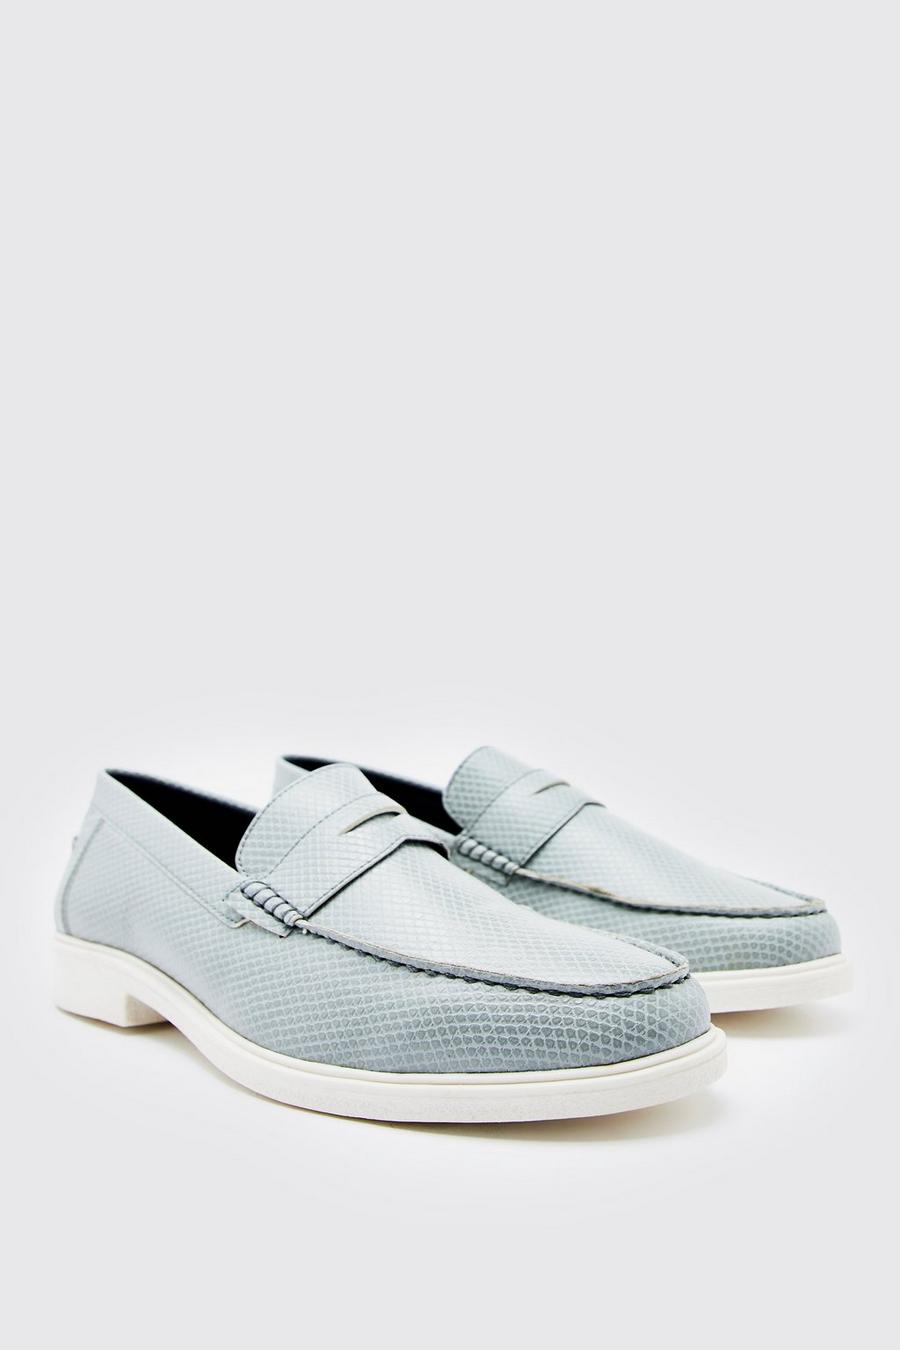 Light blue azul Textured Contrast Sole Penny Loafer